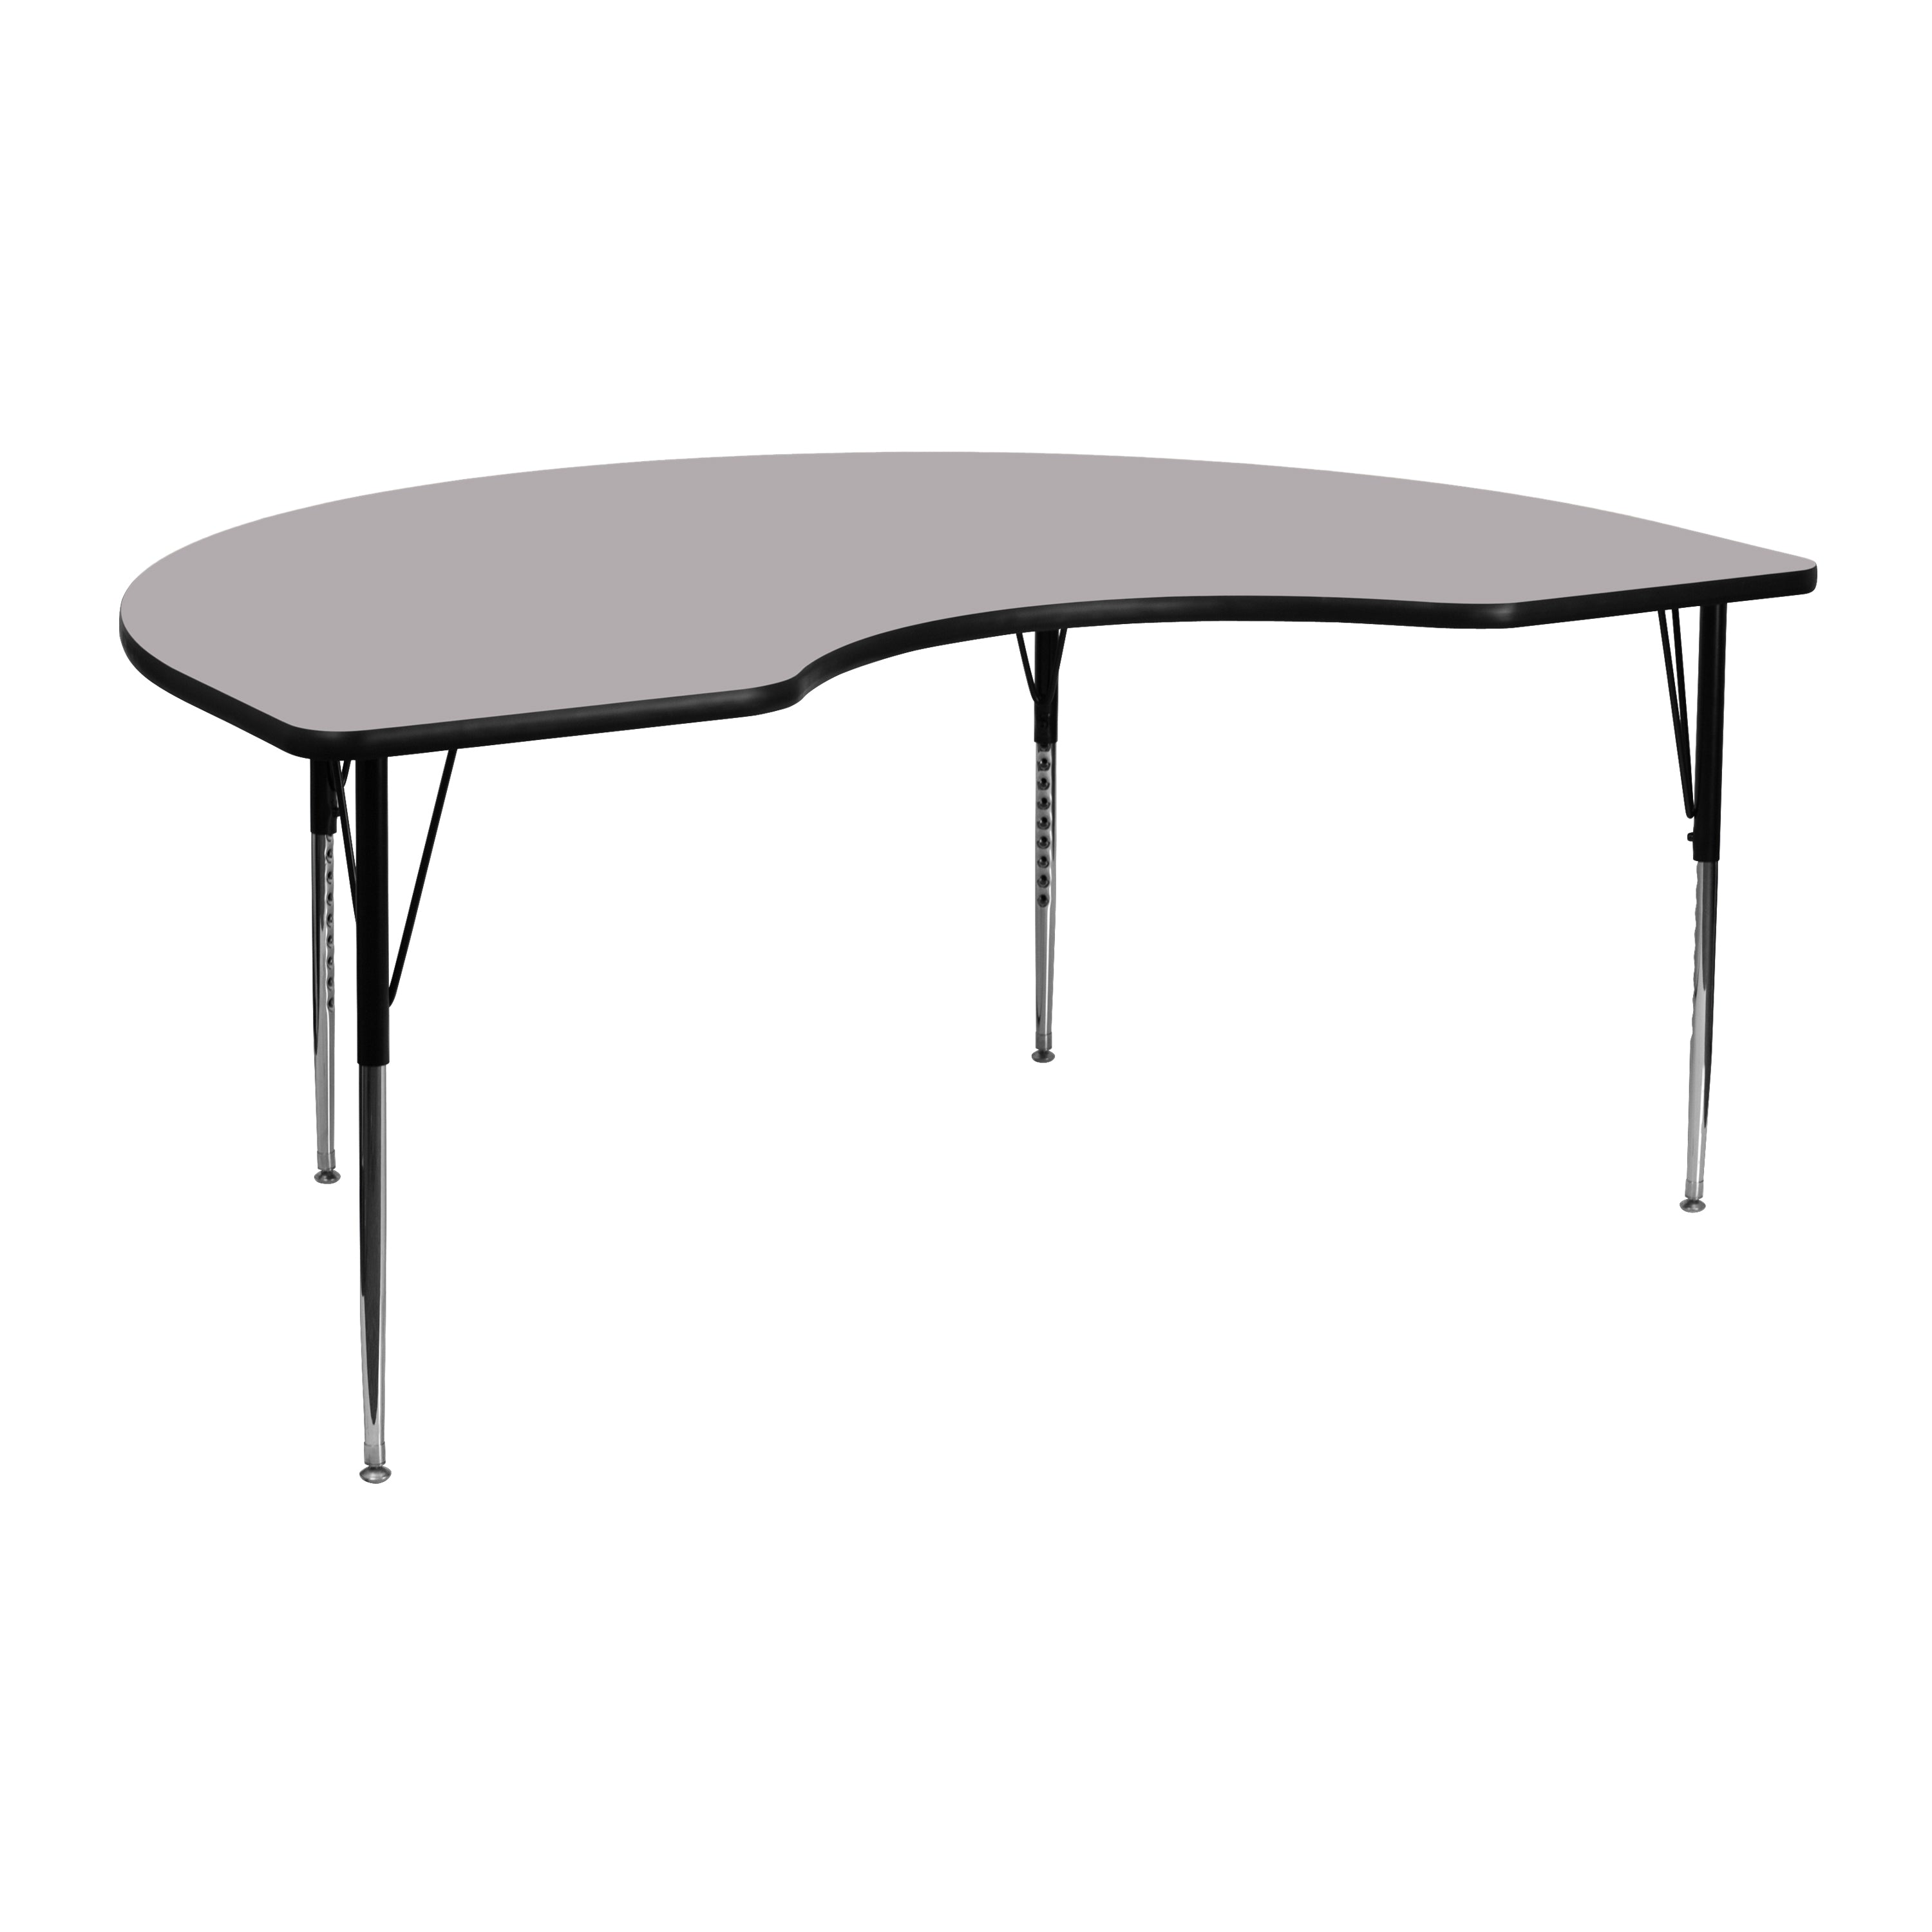 48''W x 72''L Kidney Thermal Laminate Activity Table - Standard Height Adjustable Legs-Kidney Activity Table-Flash Furniture-Wall2Wall Furnishings